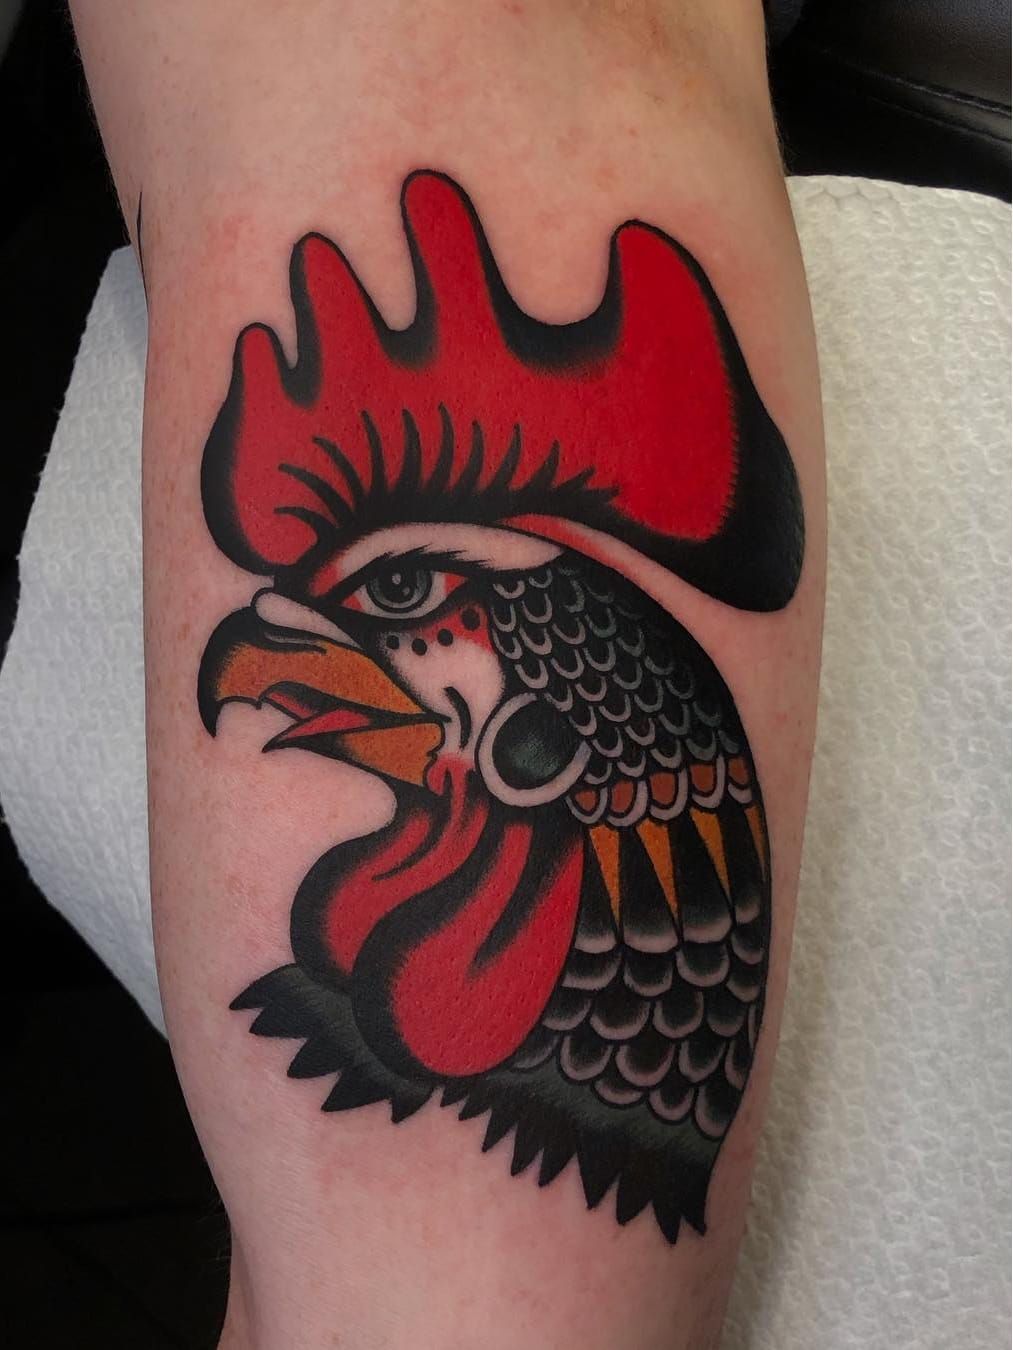 10 BEST YEAR OF THE ROOSTER TATTOOS  Tattoocom  Rooster tattoo Chicken  tattoo Tattoo designs men